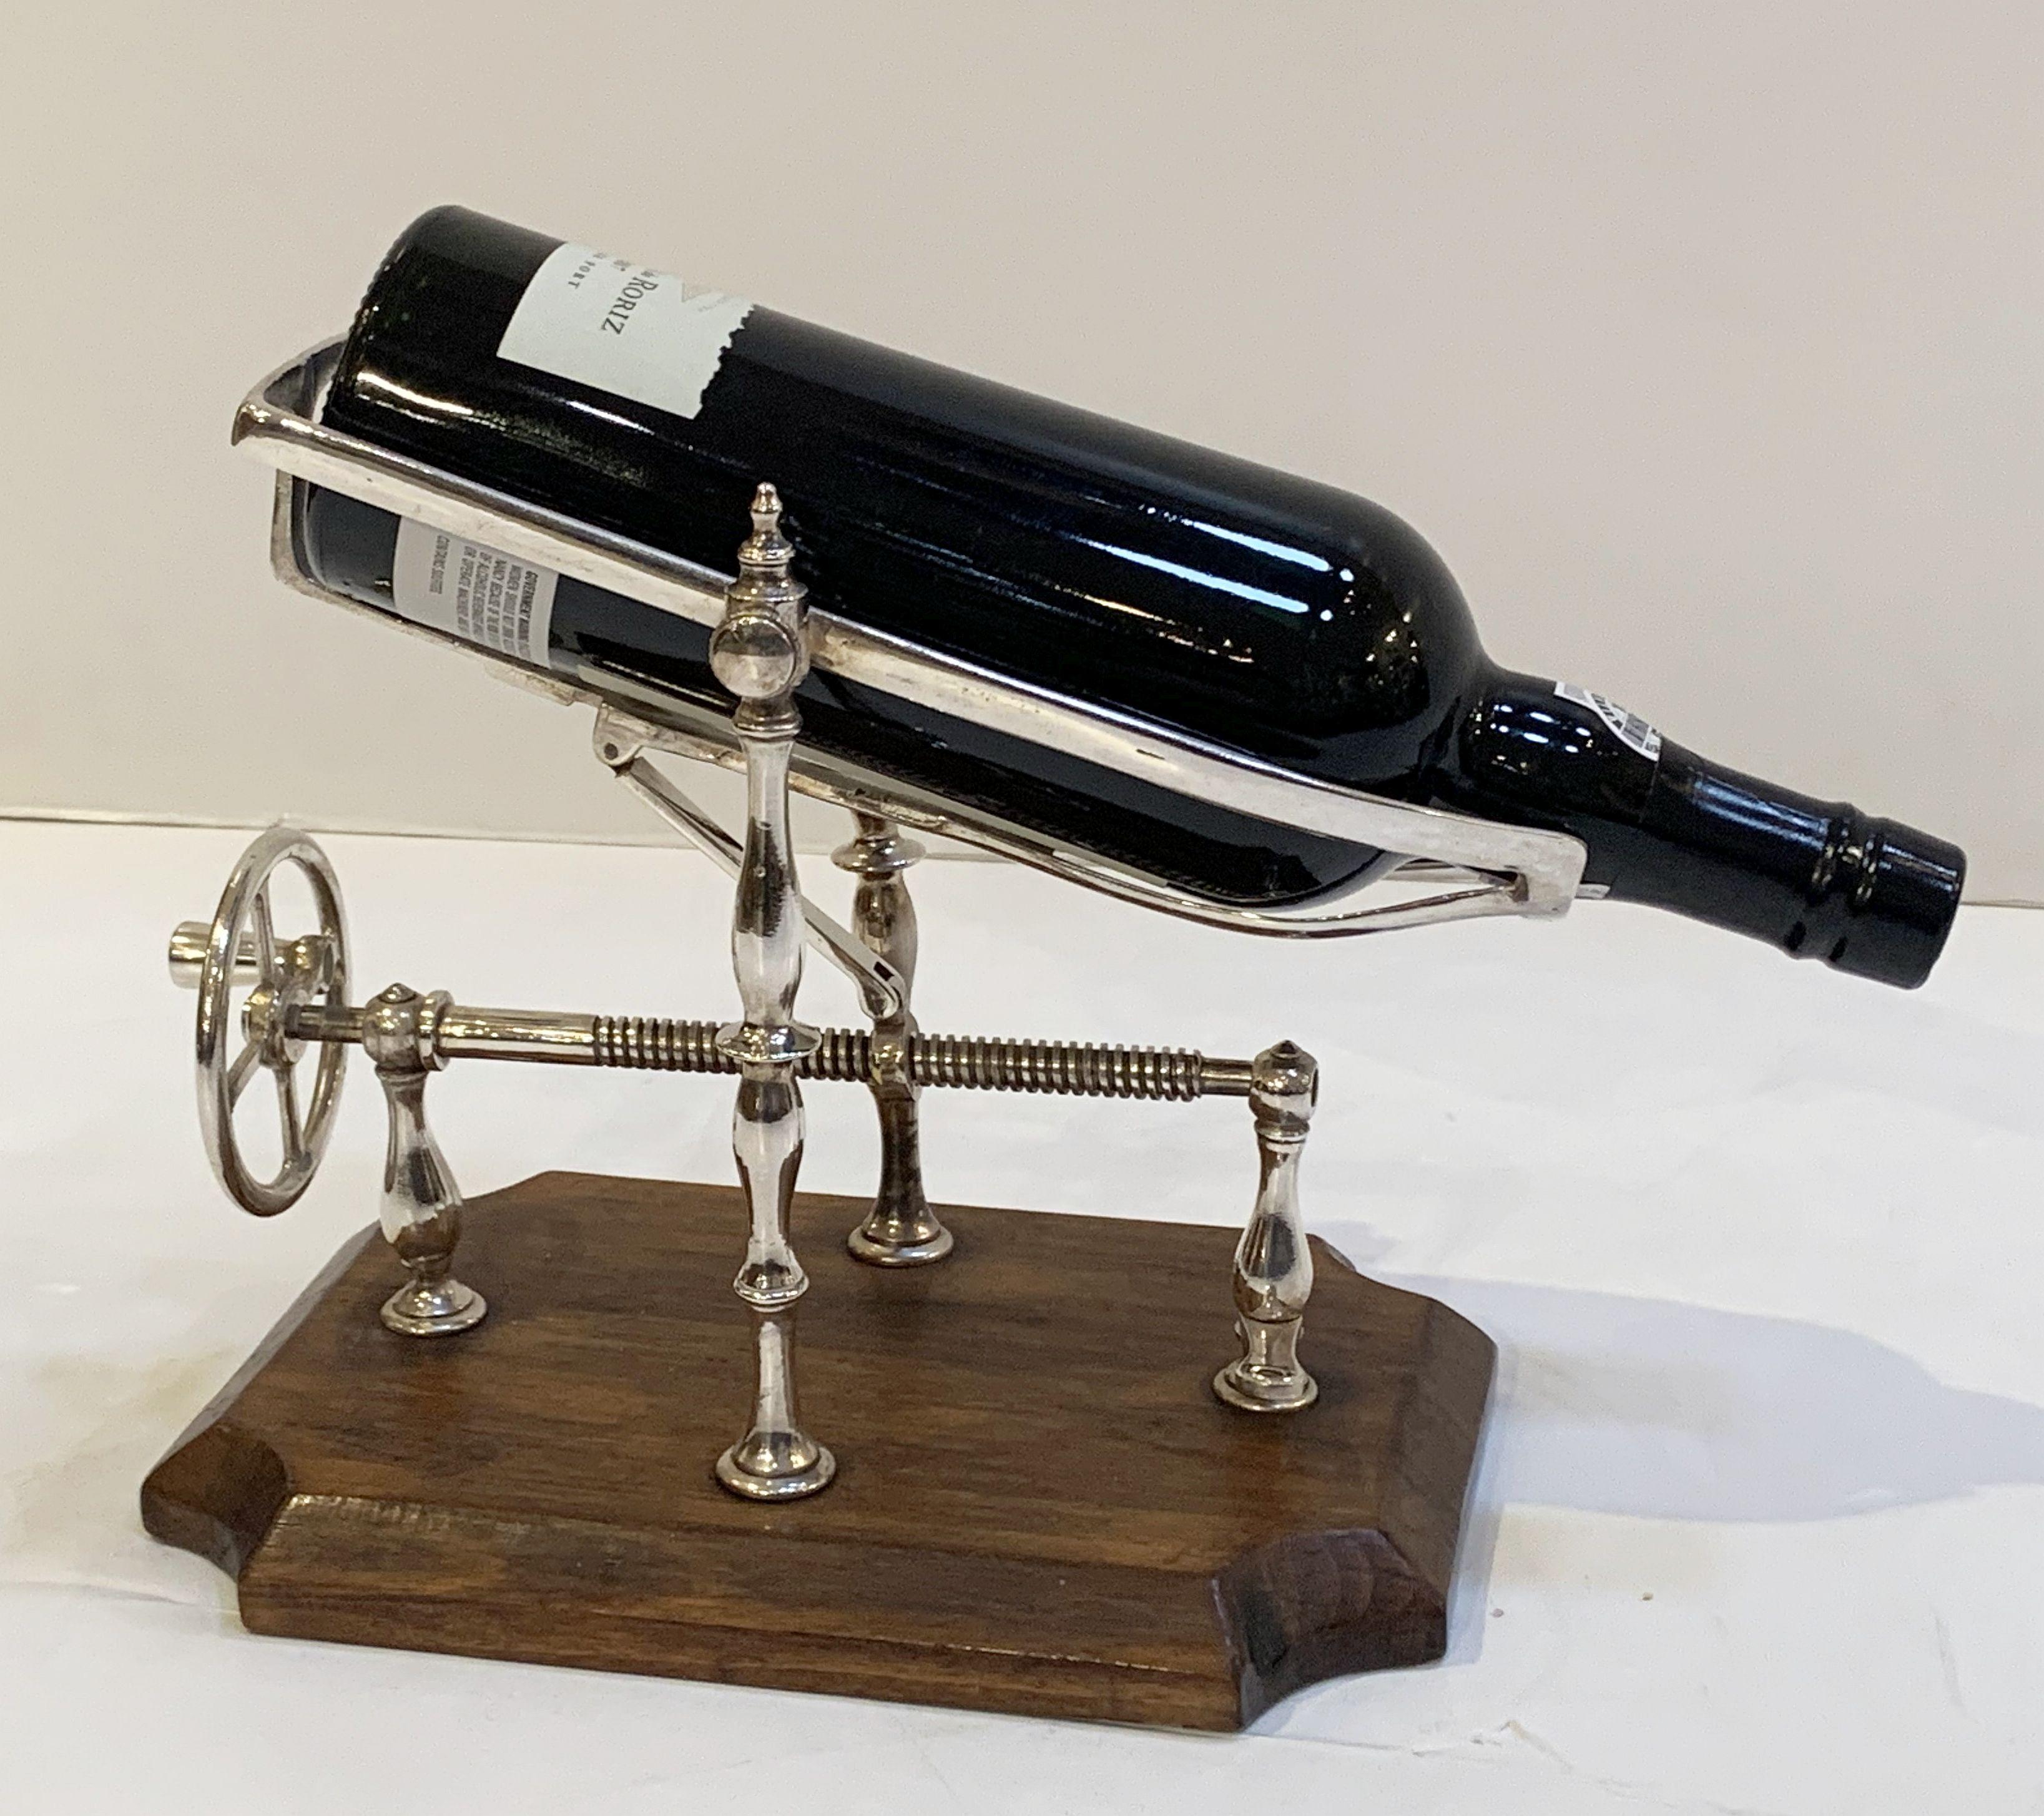 A handsome English port decanter or wine bottle pourer of silvered or chromed metal with turn screw action, on moulded rectangular wooden base.

A mechanical spirits pourer or decanting cradle is an artisan-like decanting device - turning the screw